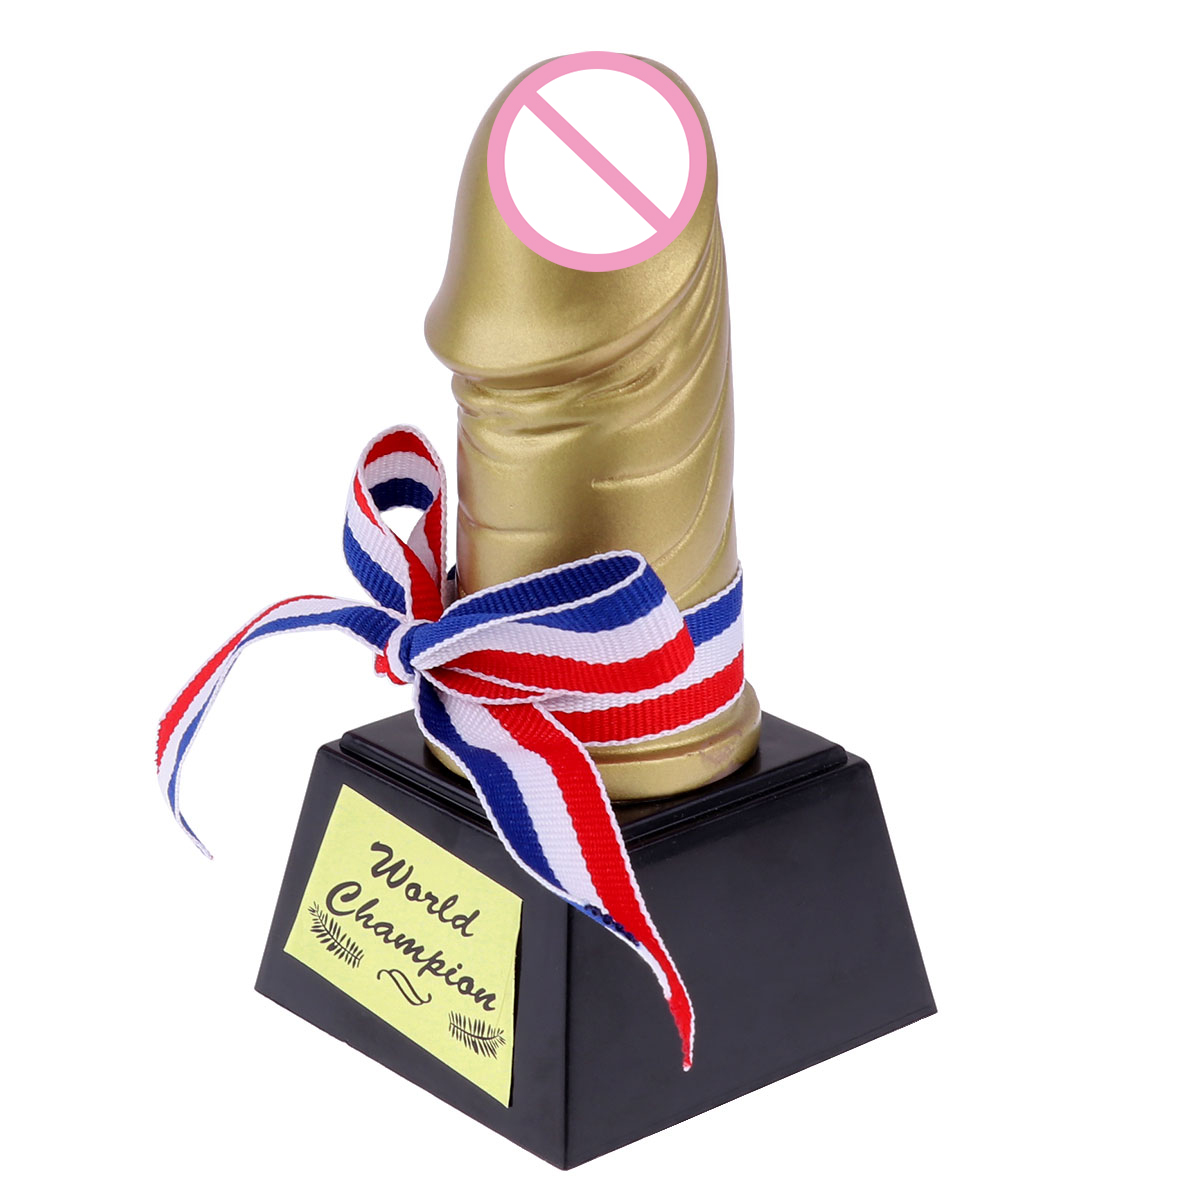 Creative Penis Trophy Novelty Golden Birthday Gifts Hen Stag Party Trophy Funny Prop Toys Unique Bachelorette Party Accessories